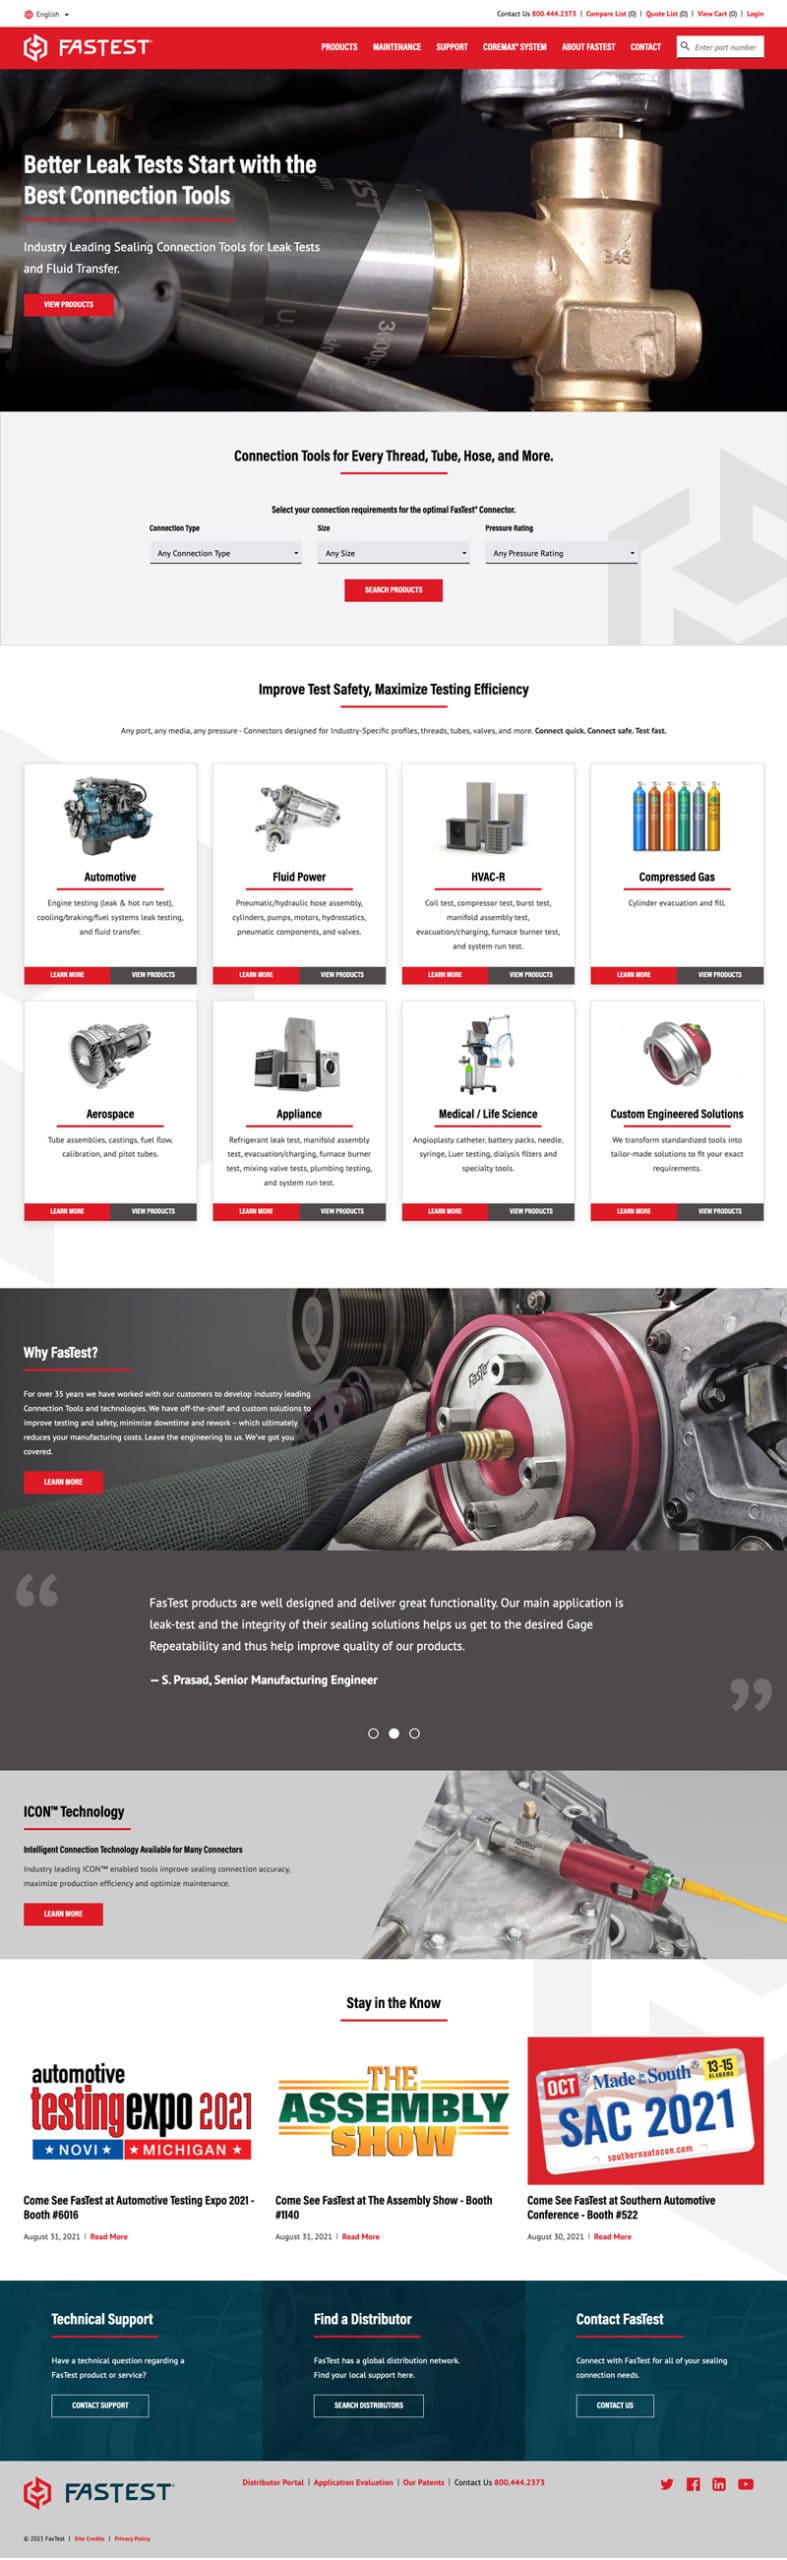 B2B Sealing Connection Tools Manufacturer Web Design FasTest Home